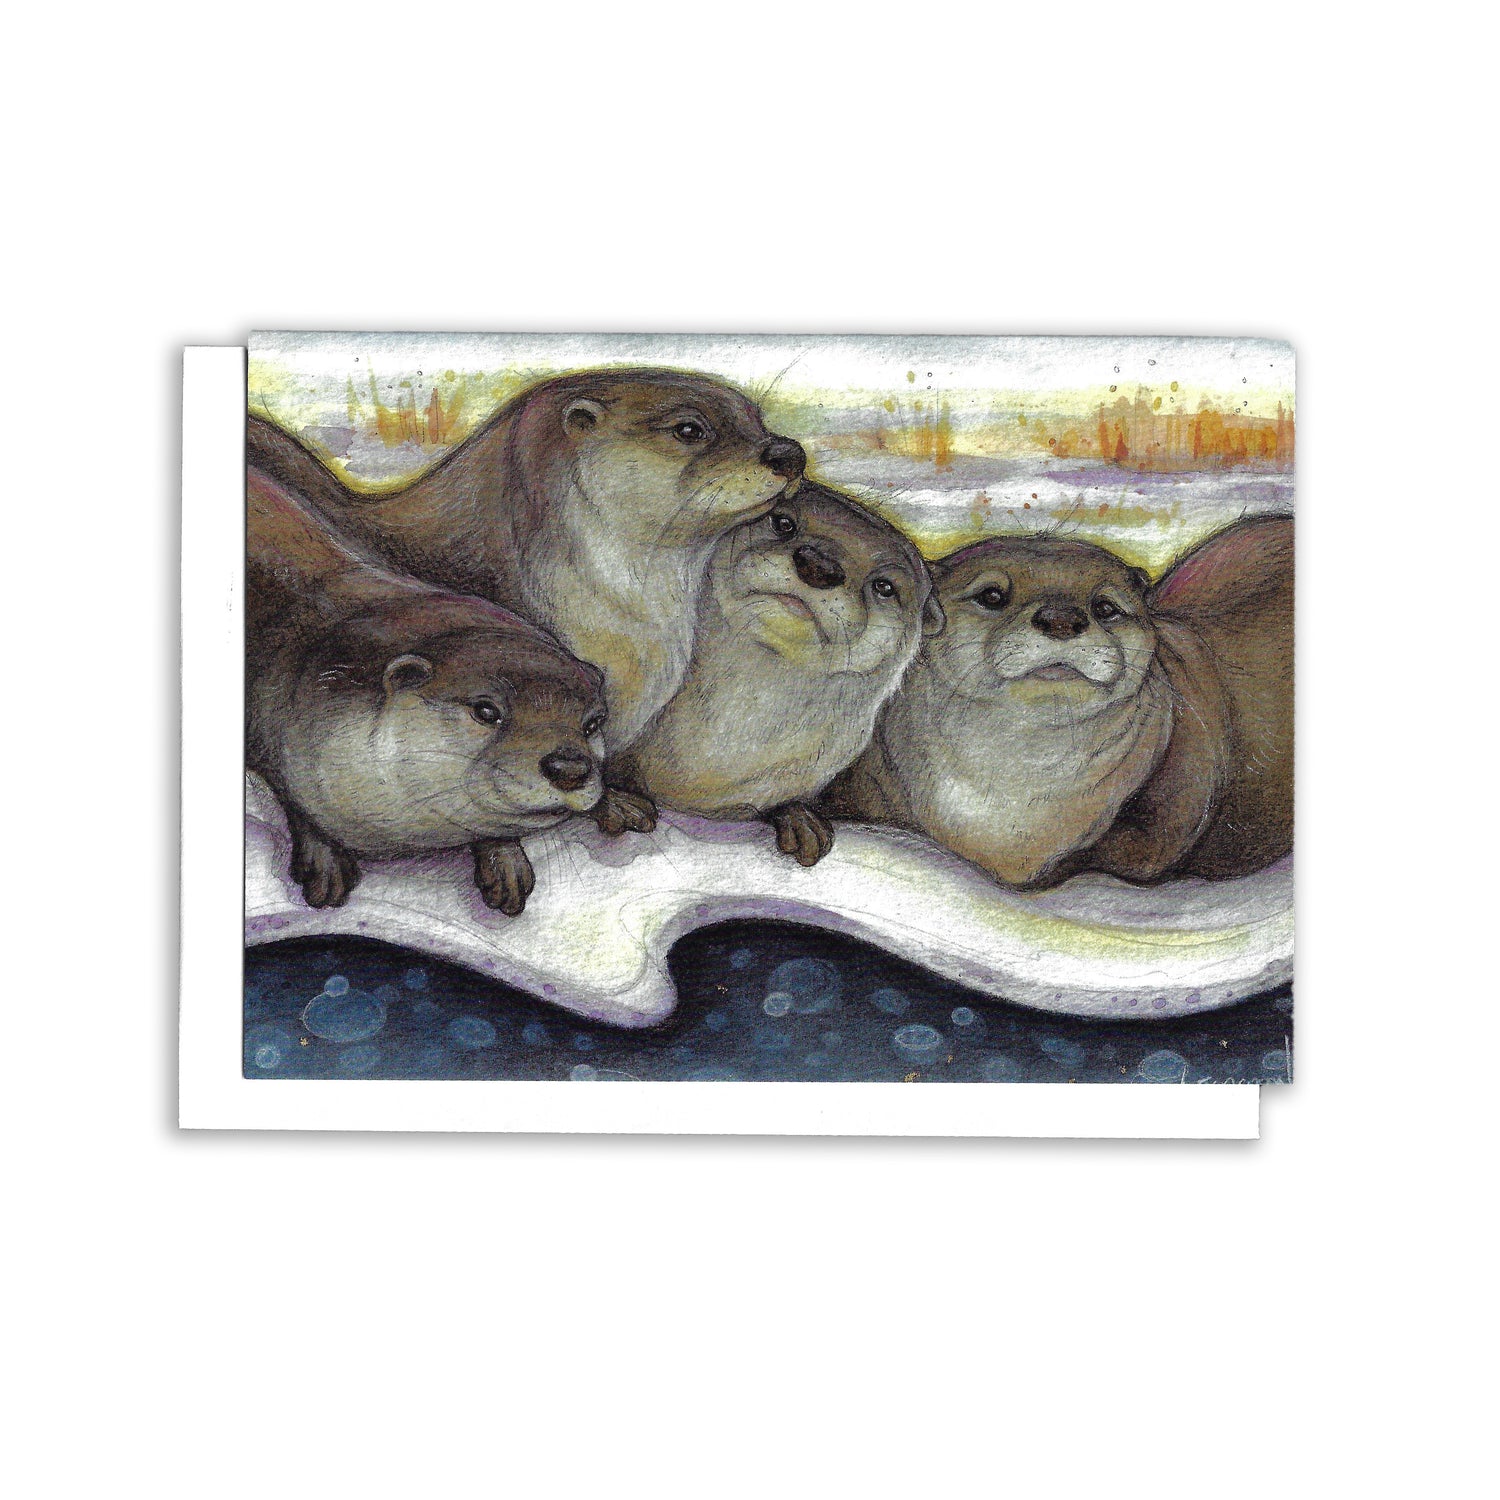 Illustration of four river otters huddled together on the ice overlooking the water